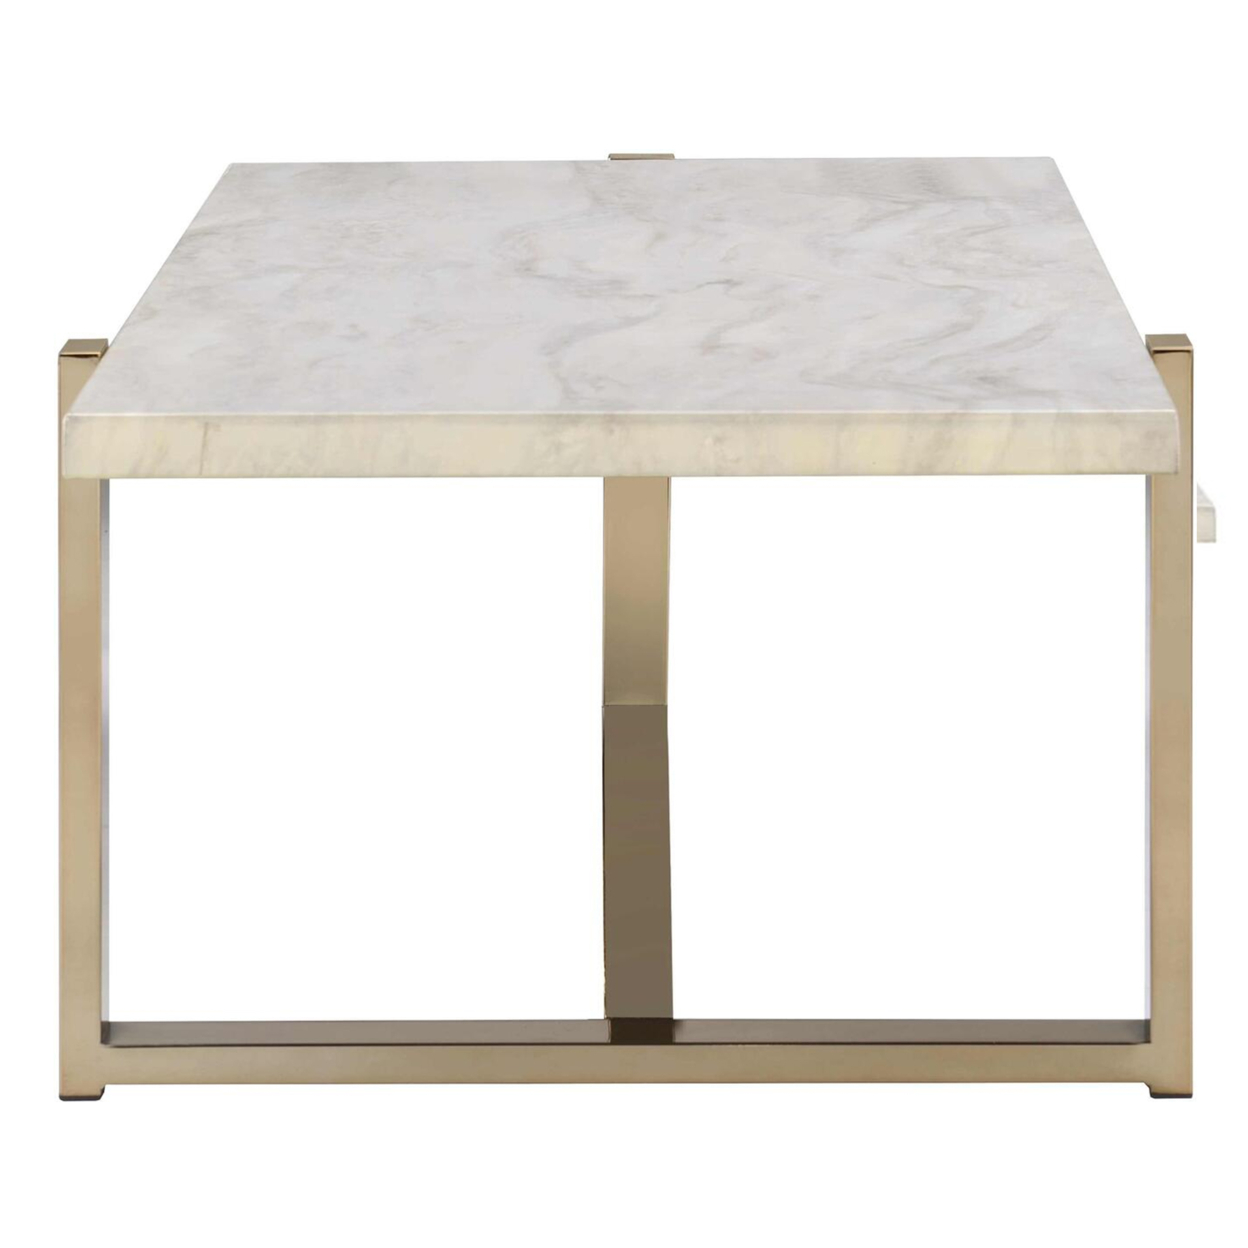 Modern Metal Framed Coffee Table With Faux Marble Top, White And Gold- Saltoro Sherpi